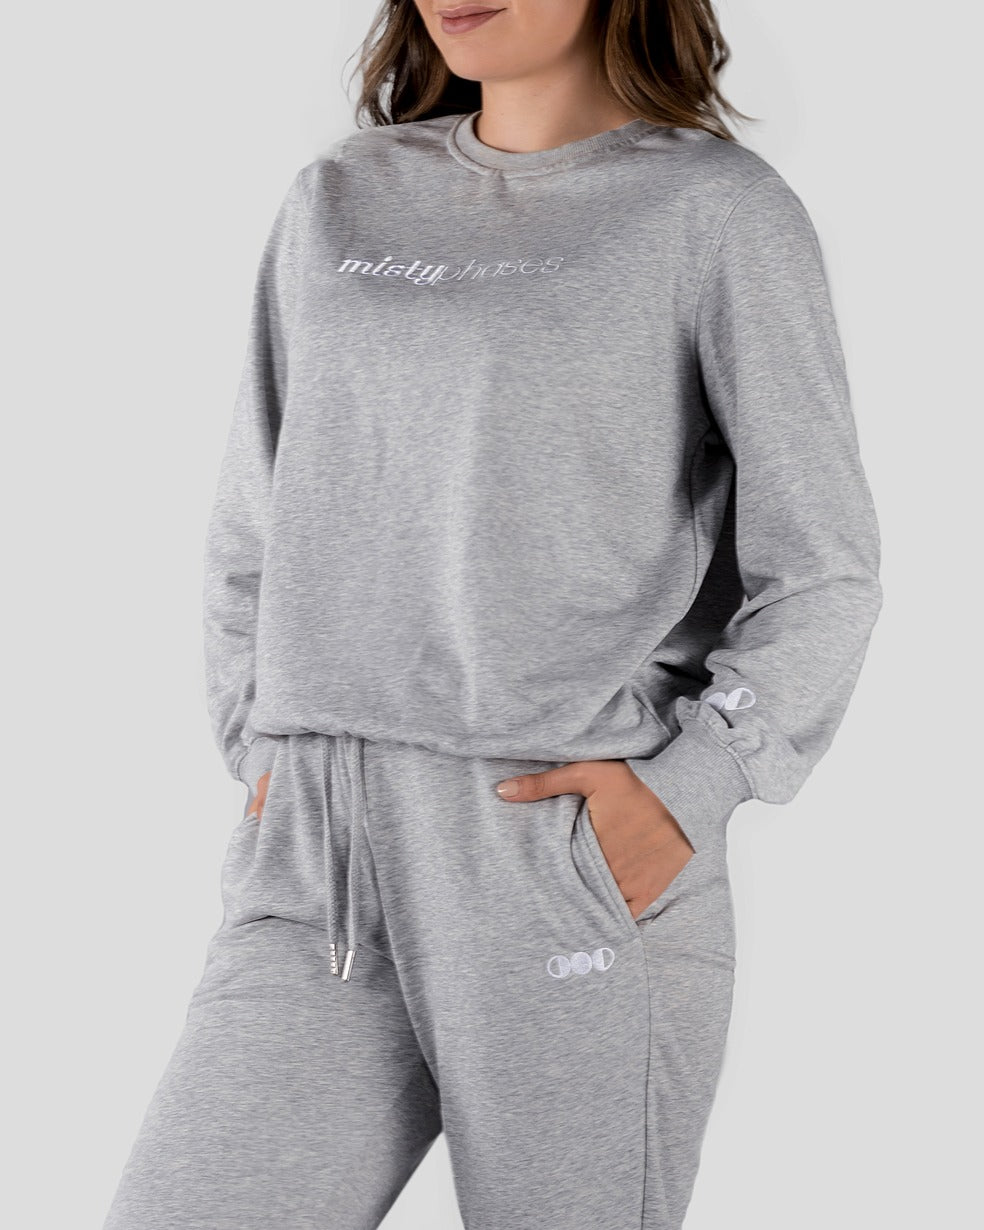 Misty Phases Signature Sweat Suit